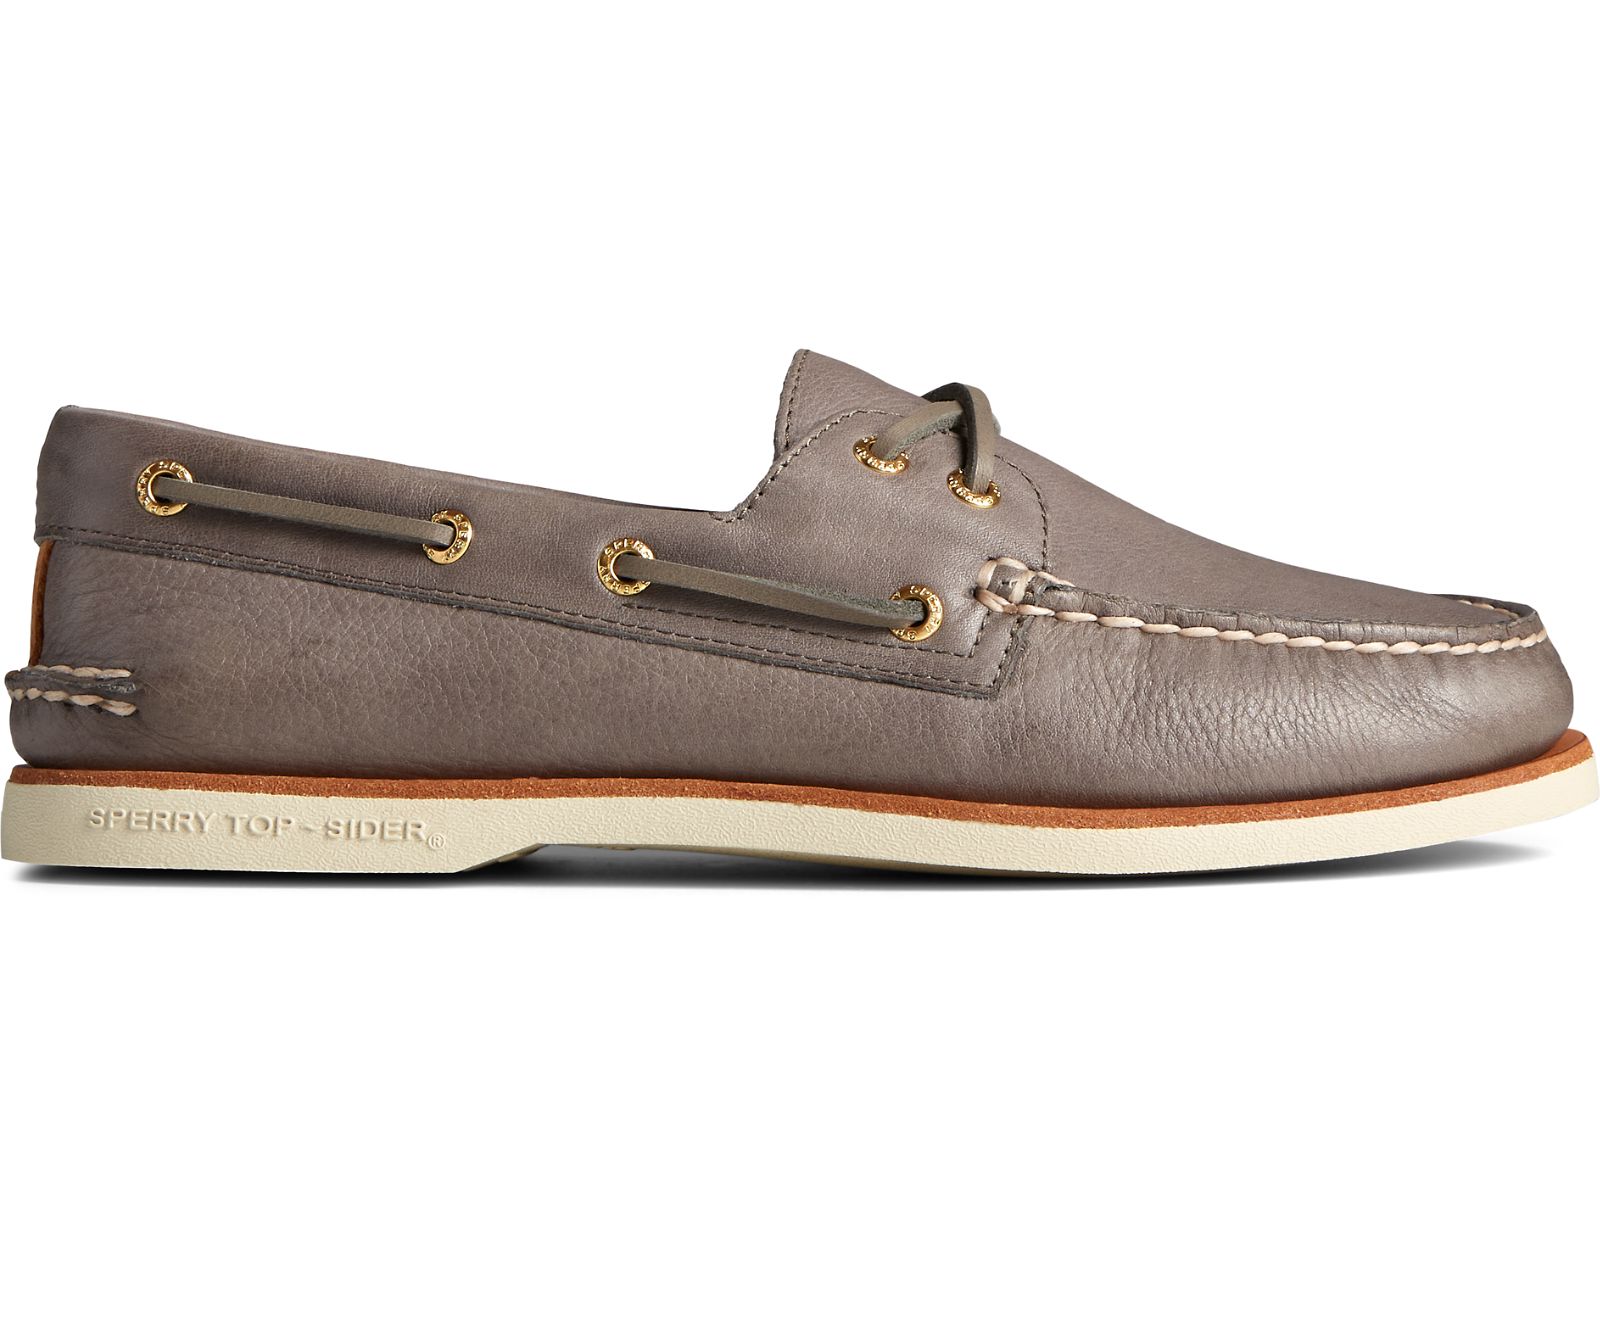 Men's Gold Cup Authentic Original 2-Eye Soft Leather Boat Shoe - Charcoal